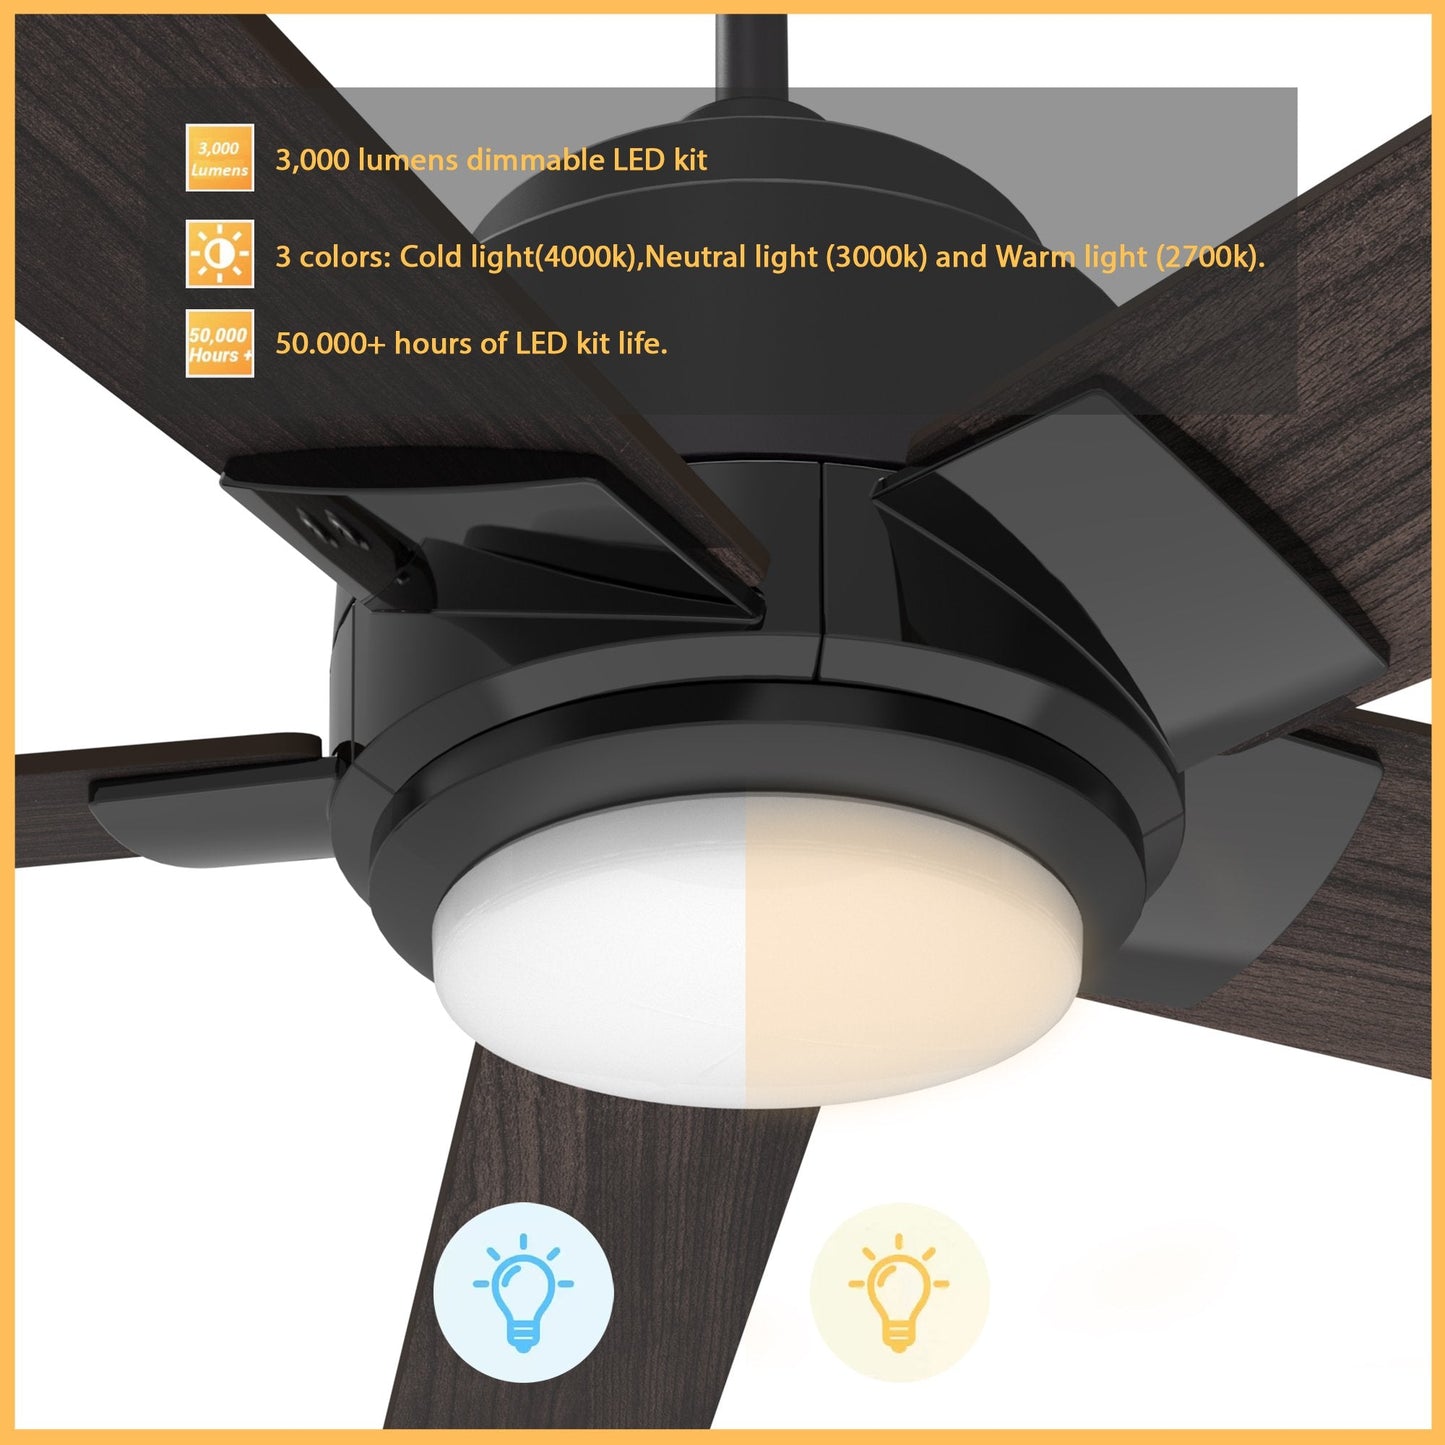 Aspen 52'' Best Smart Ceiling Fan with Remote, Light Kit Included, Works with Google Assistant and Amazon Alexa,Siri Shortcut